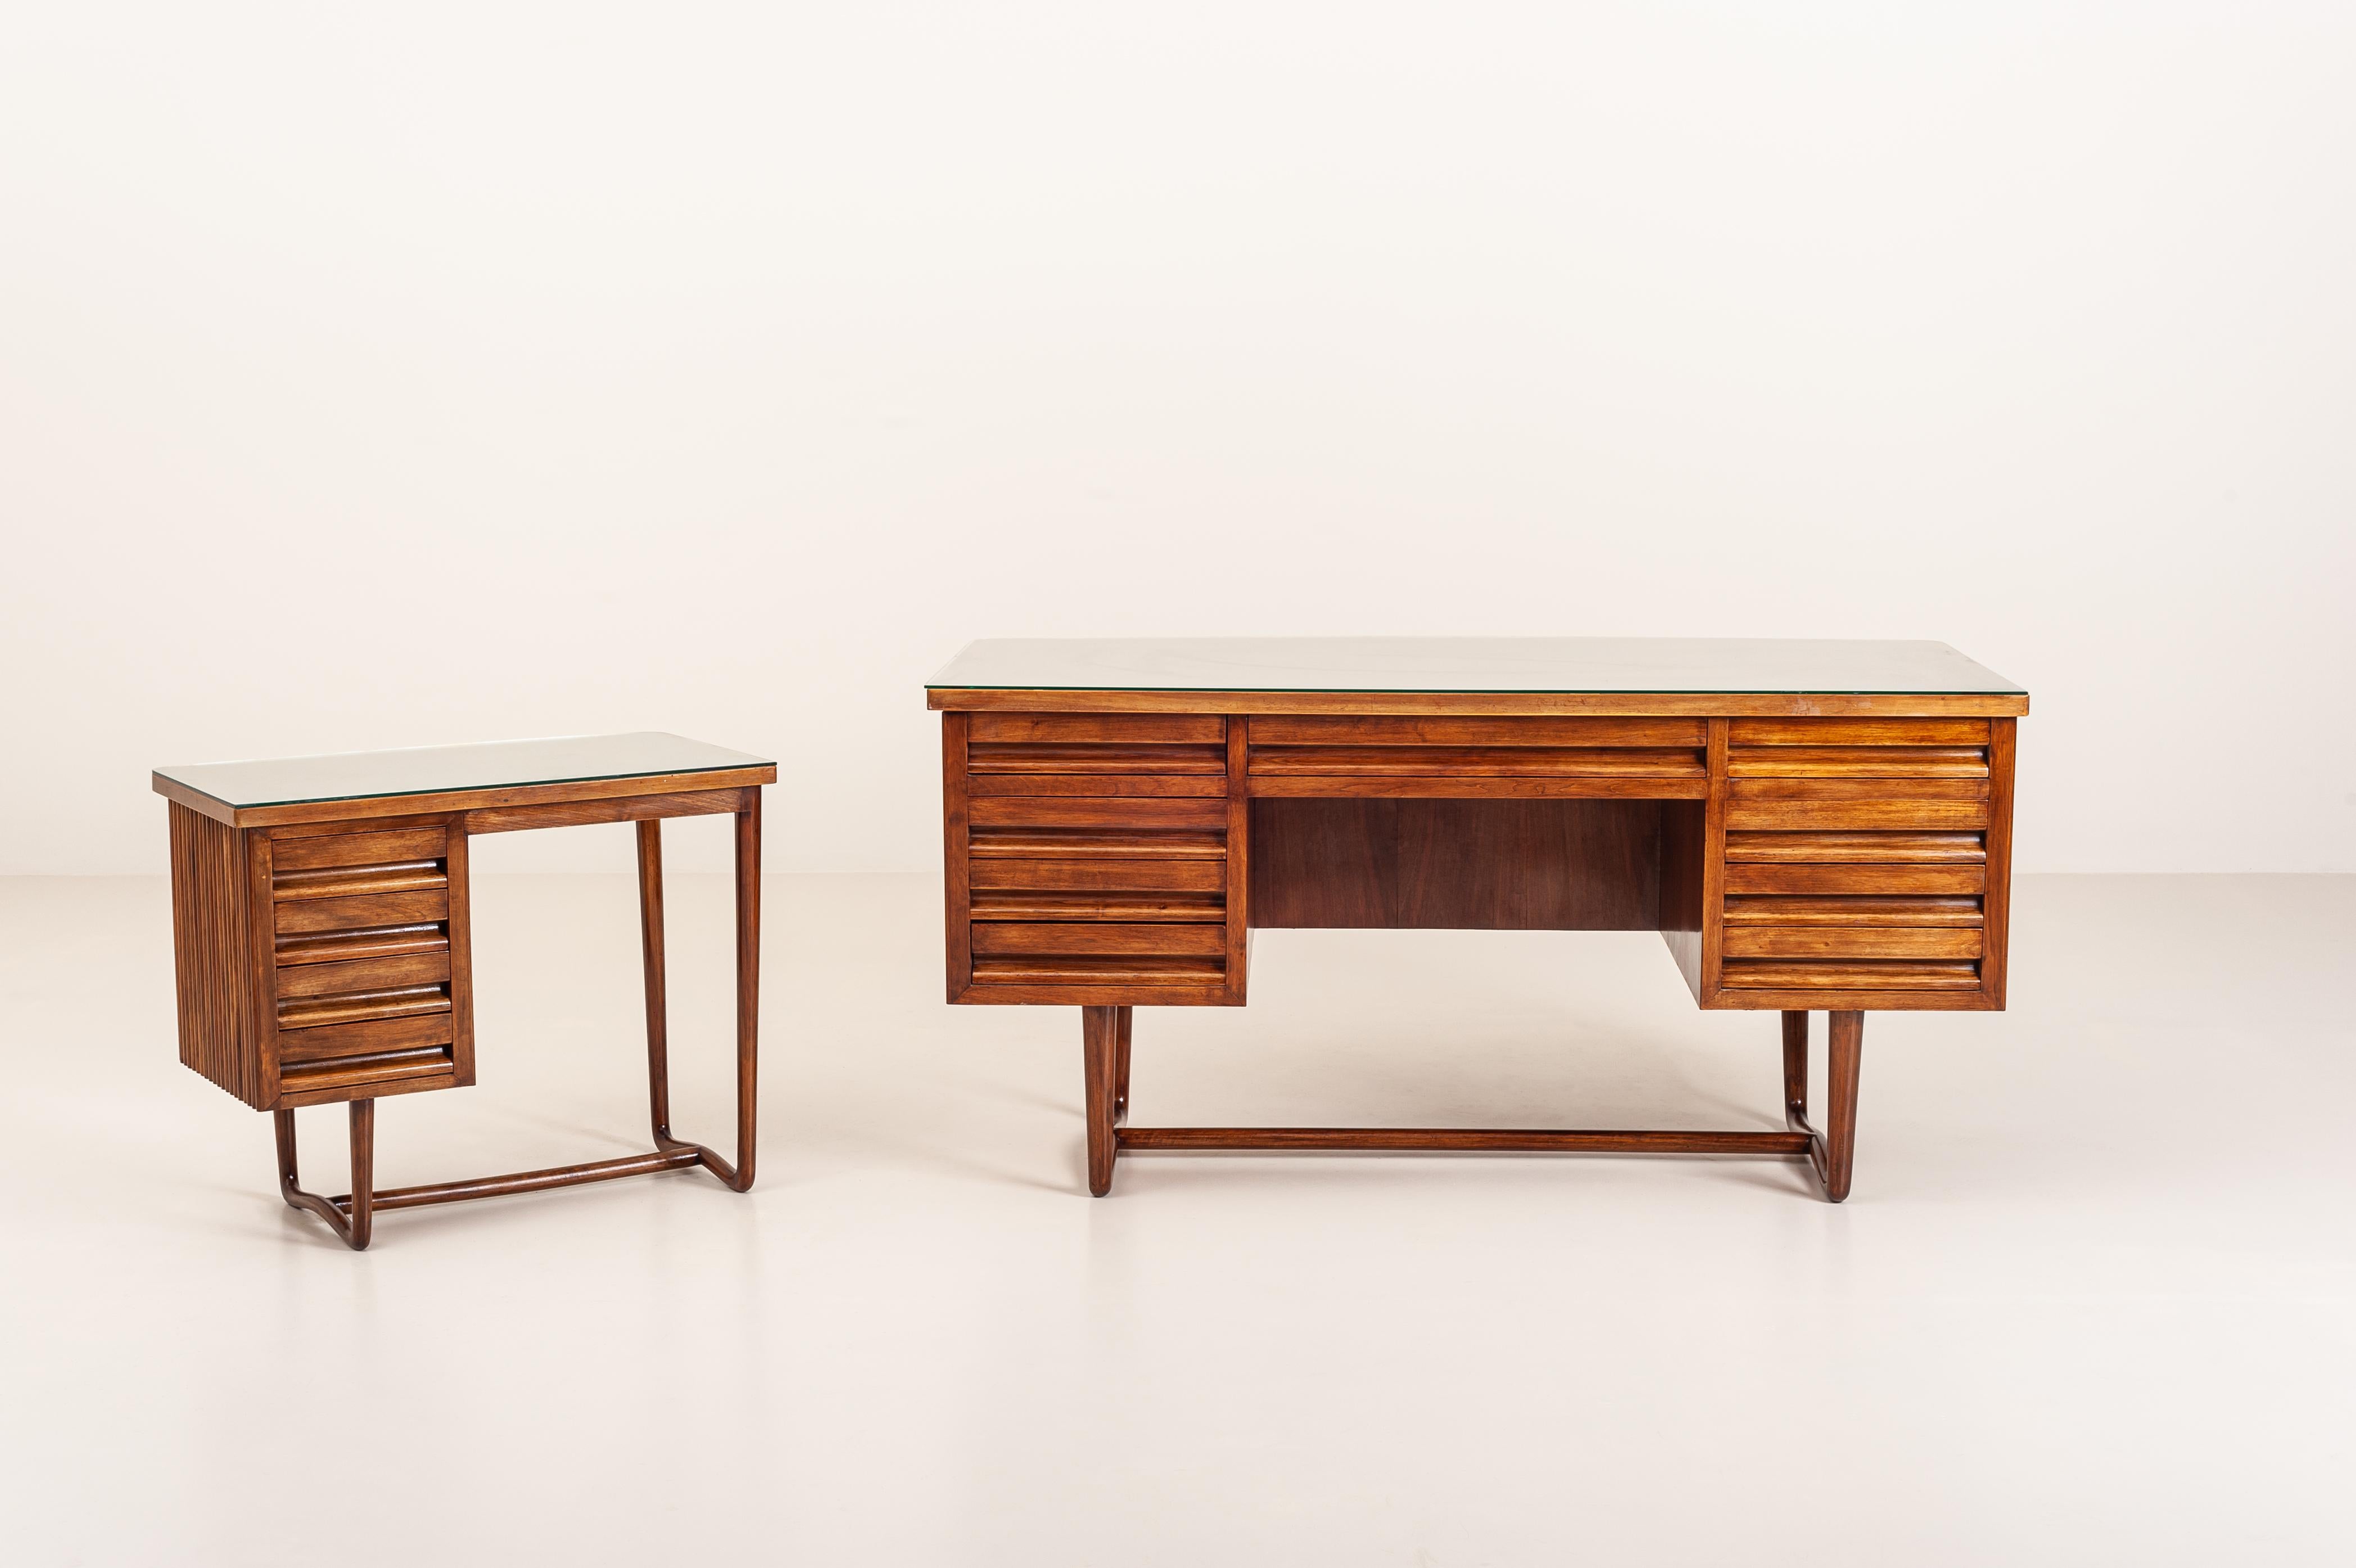 Unique and exceptional Italian executive desk made in solid walnut covered with a glass top. This table were produced in the 1950s.

Craftsmanship of this piece is at an exceptional level: solid walnut has been carved on the surface with a